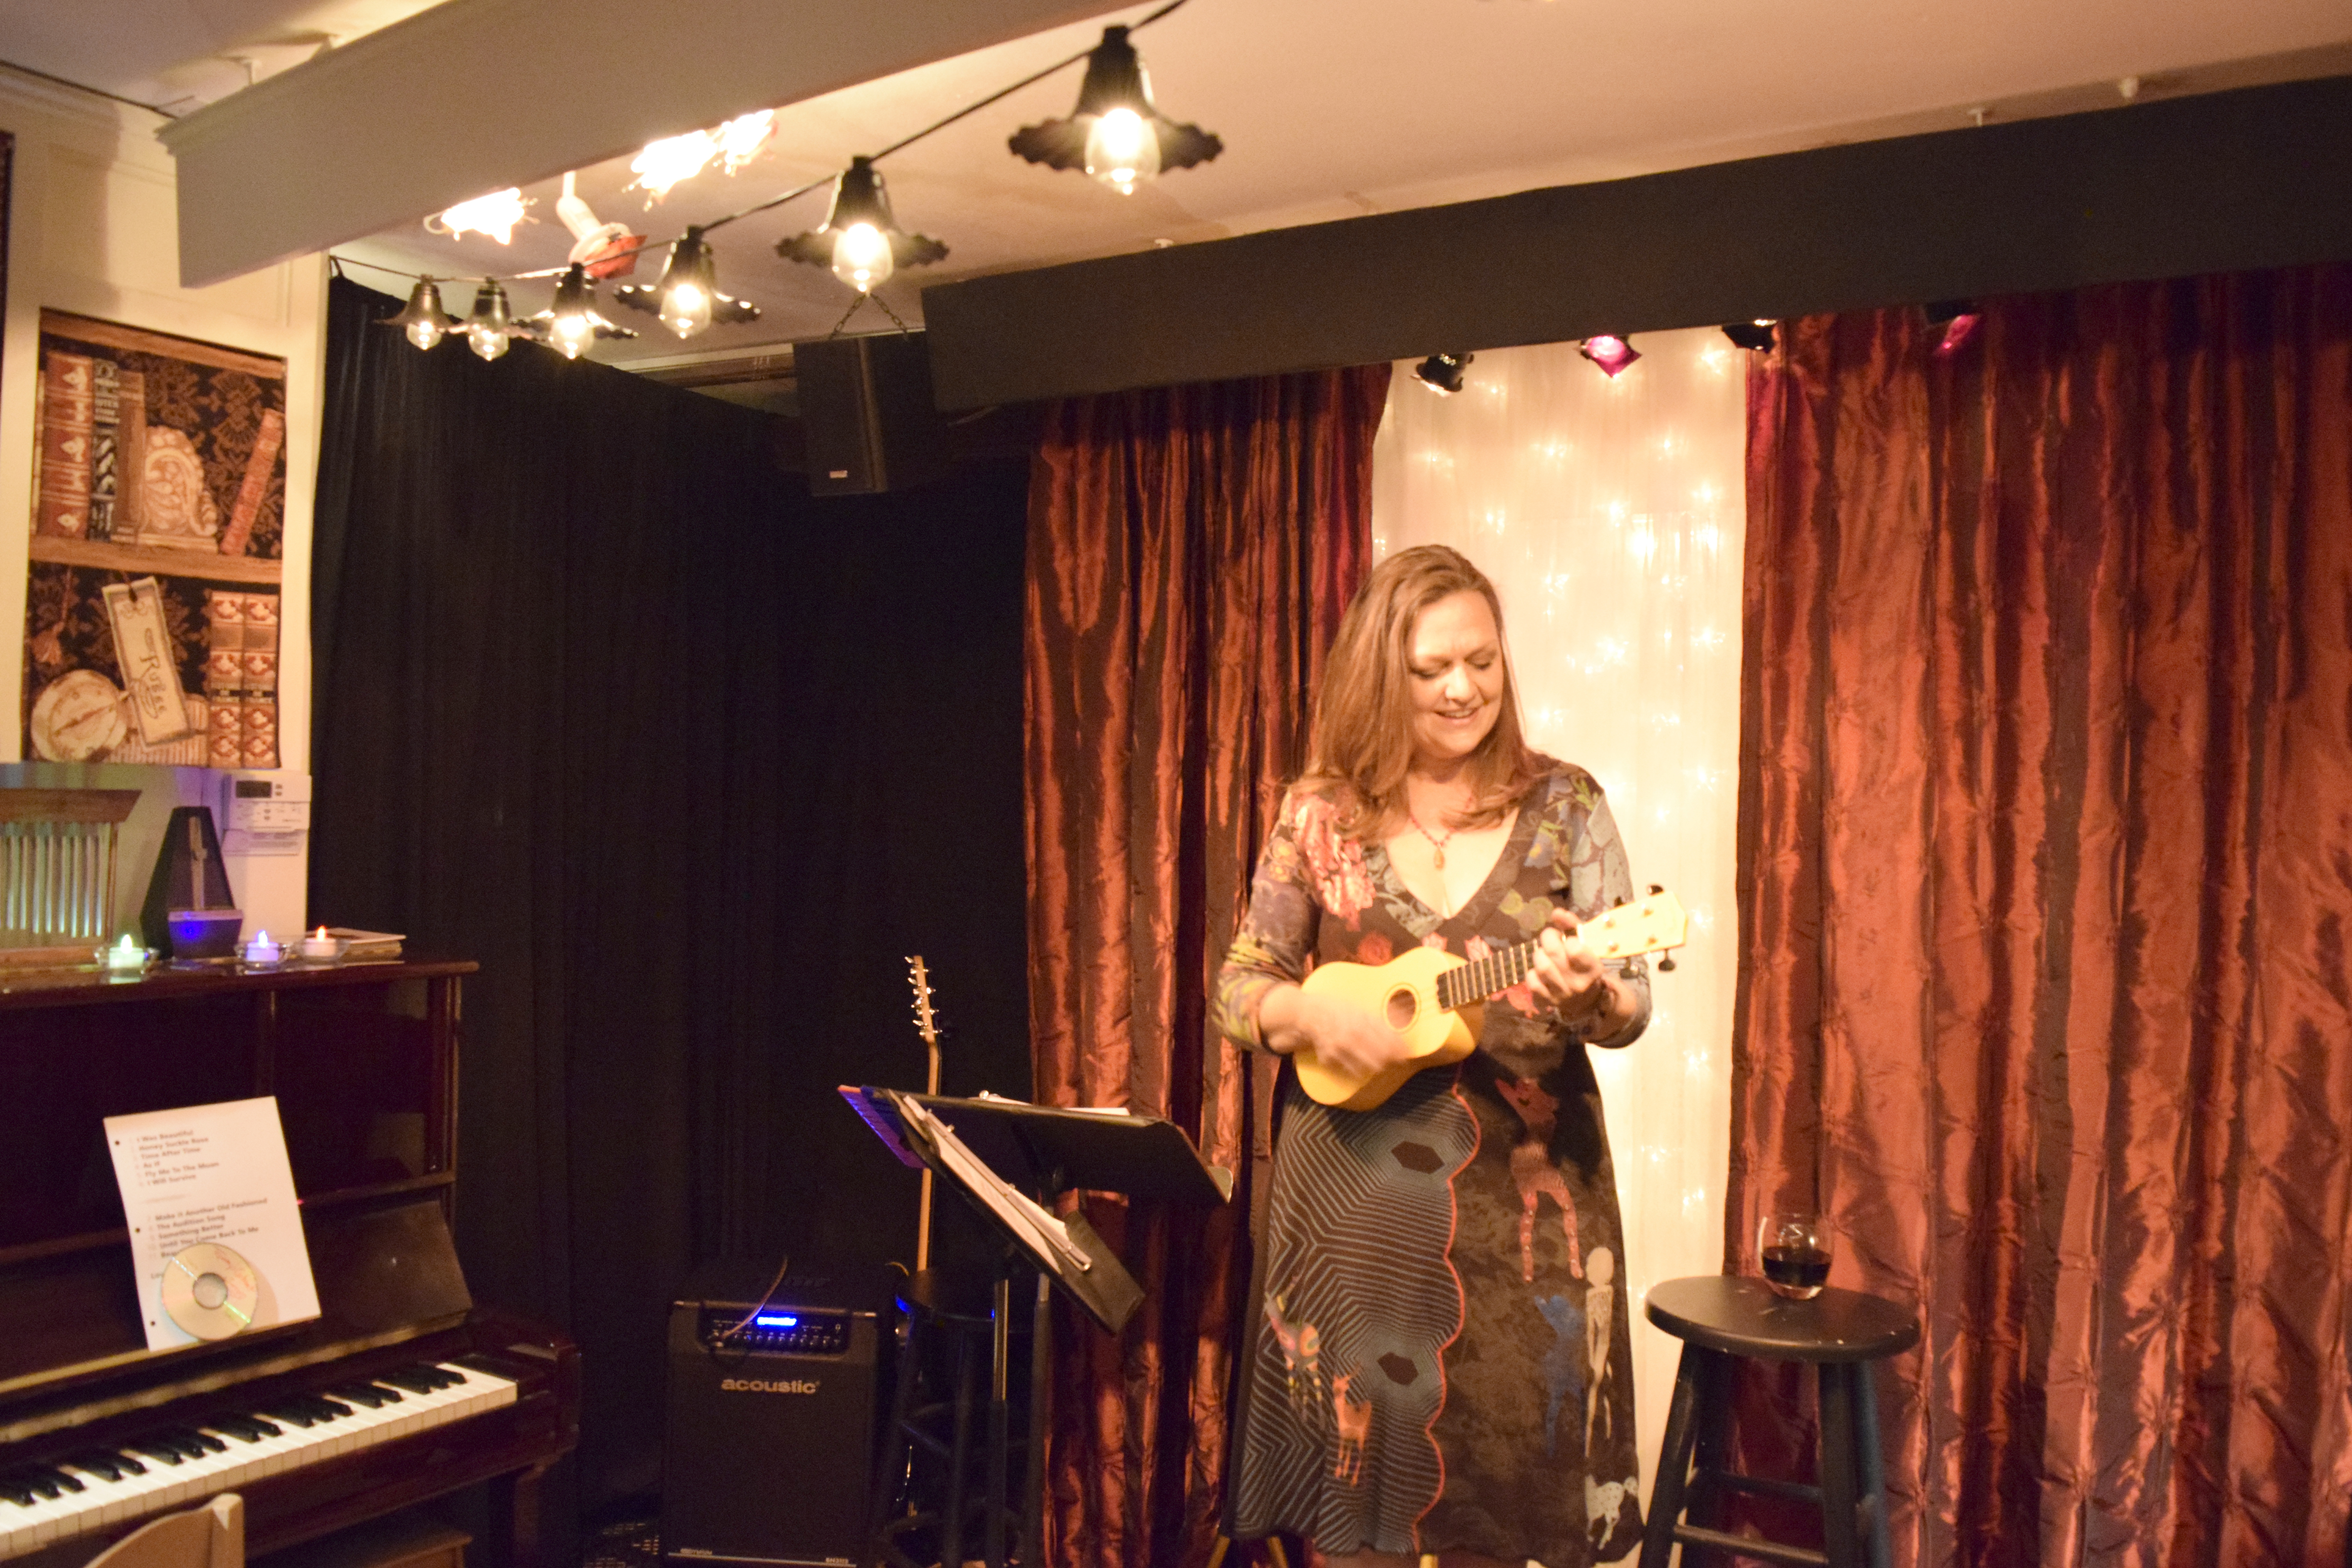 The cabaret’s featured performer Tamaralee Shutt, who is in six bands across the Central New York area, plays her ukulele during her set, which included unifying classics like “I Will Survive,” and Carole King’s  “Beautiful.”